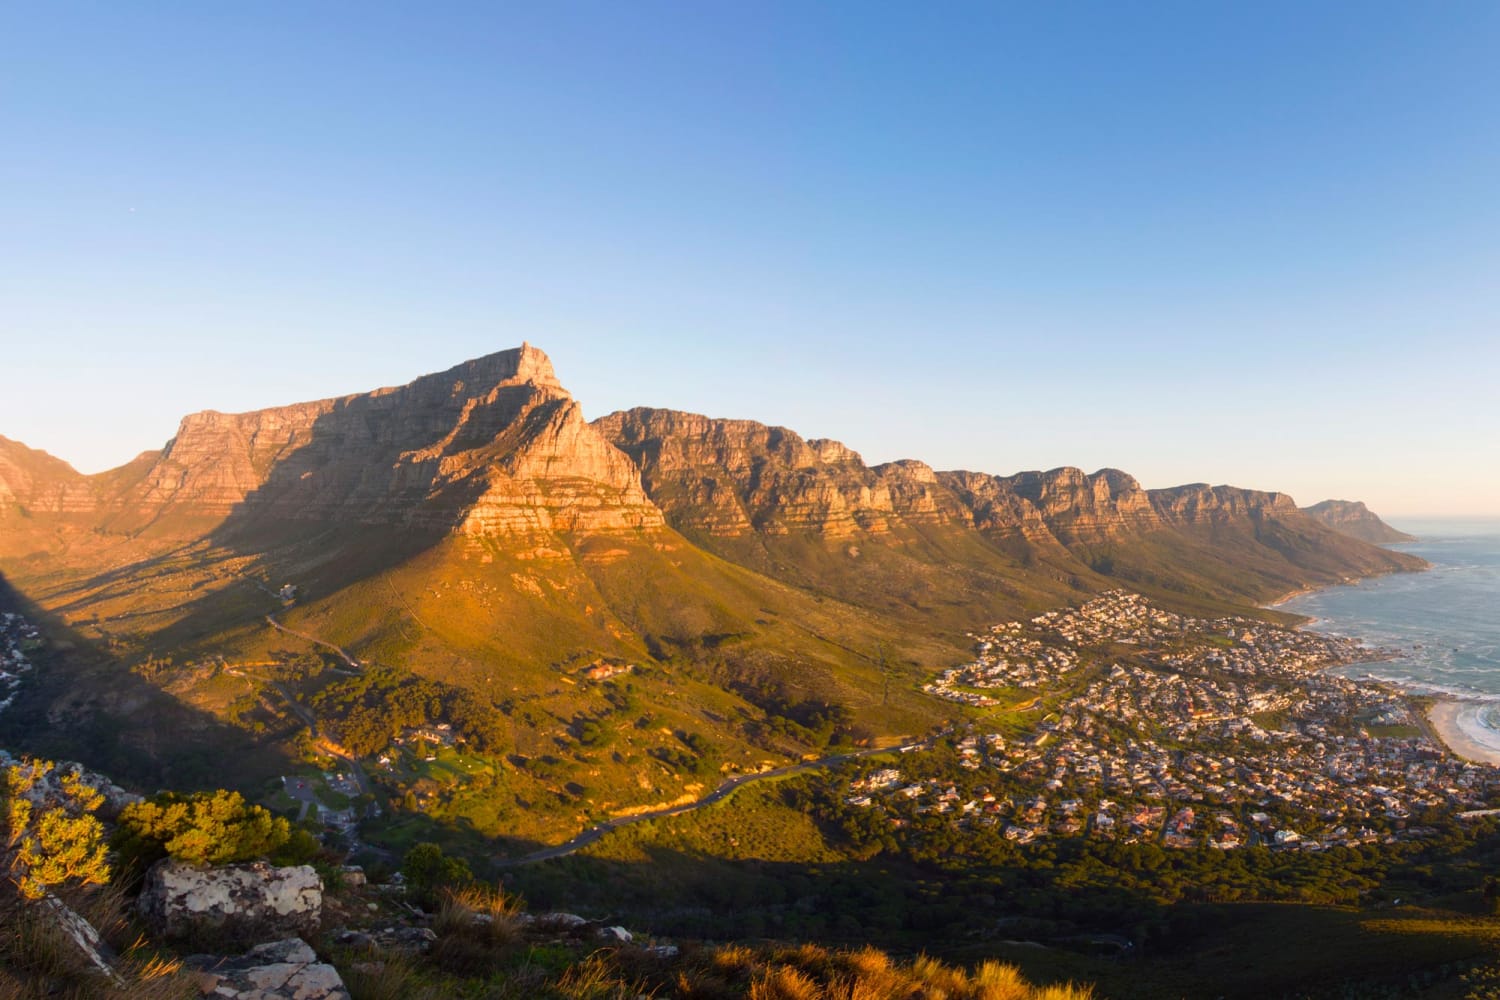 The Most Exclusive Way to Experience Table Mountain